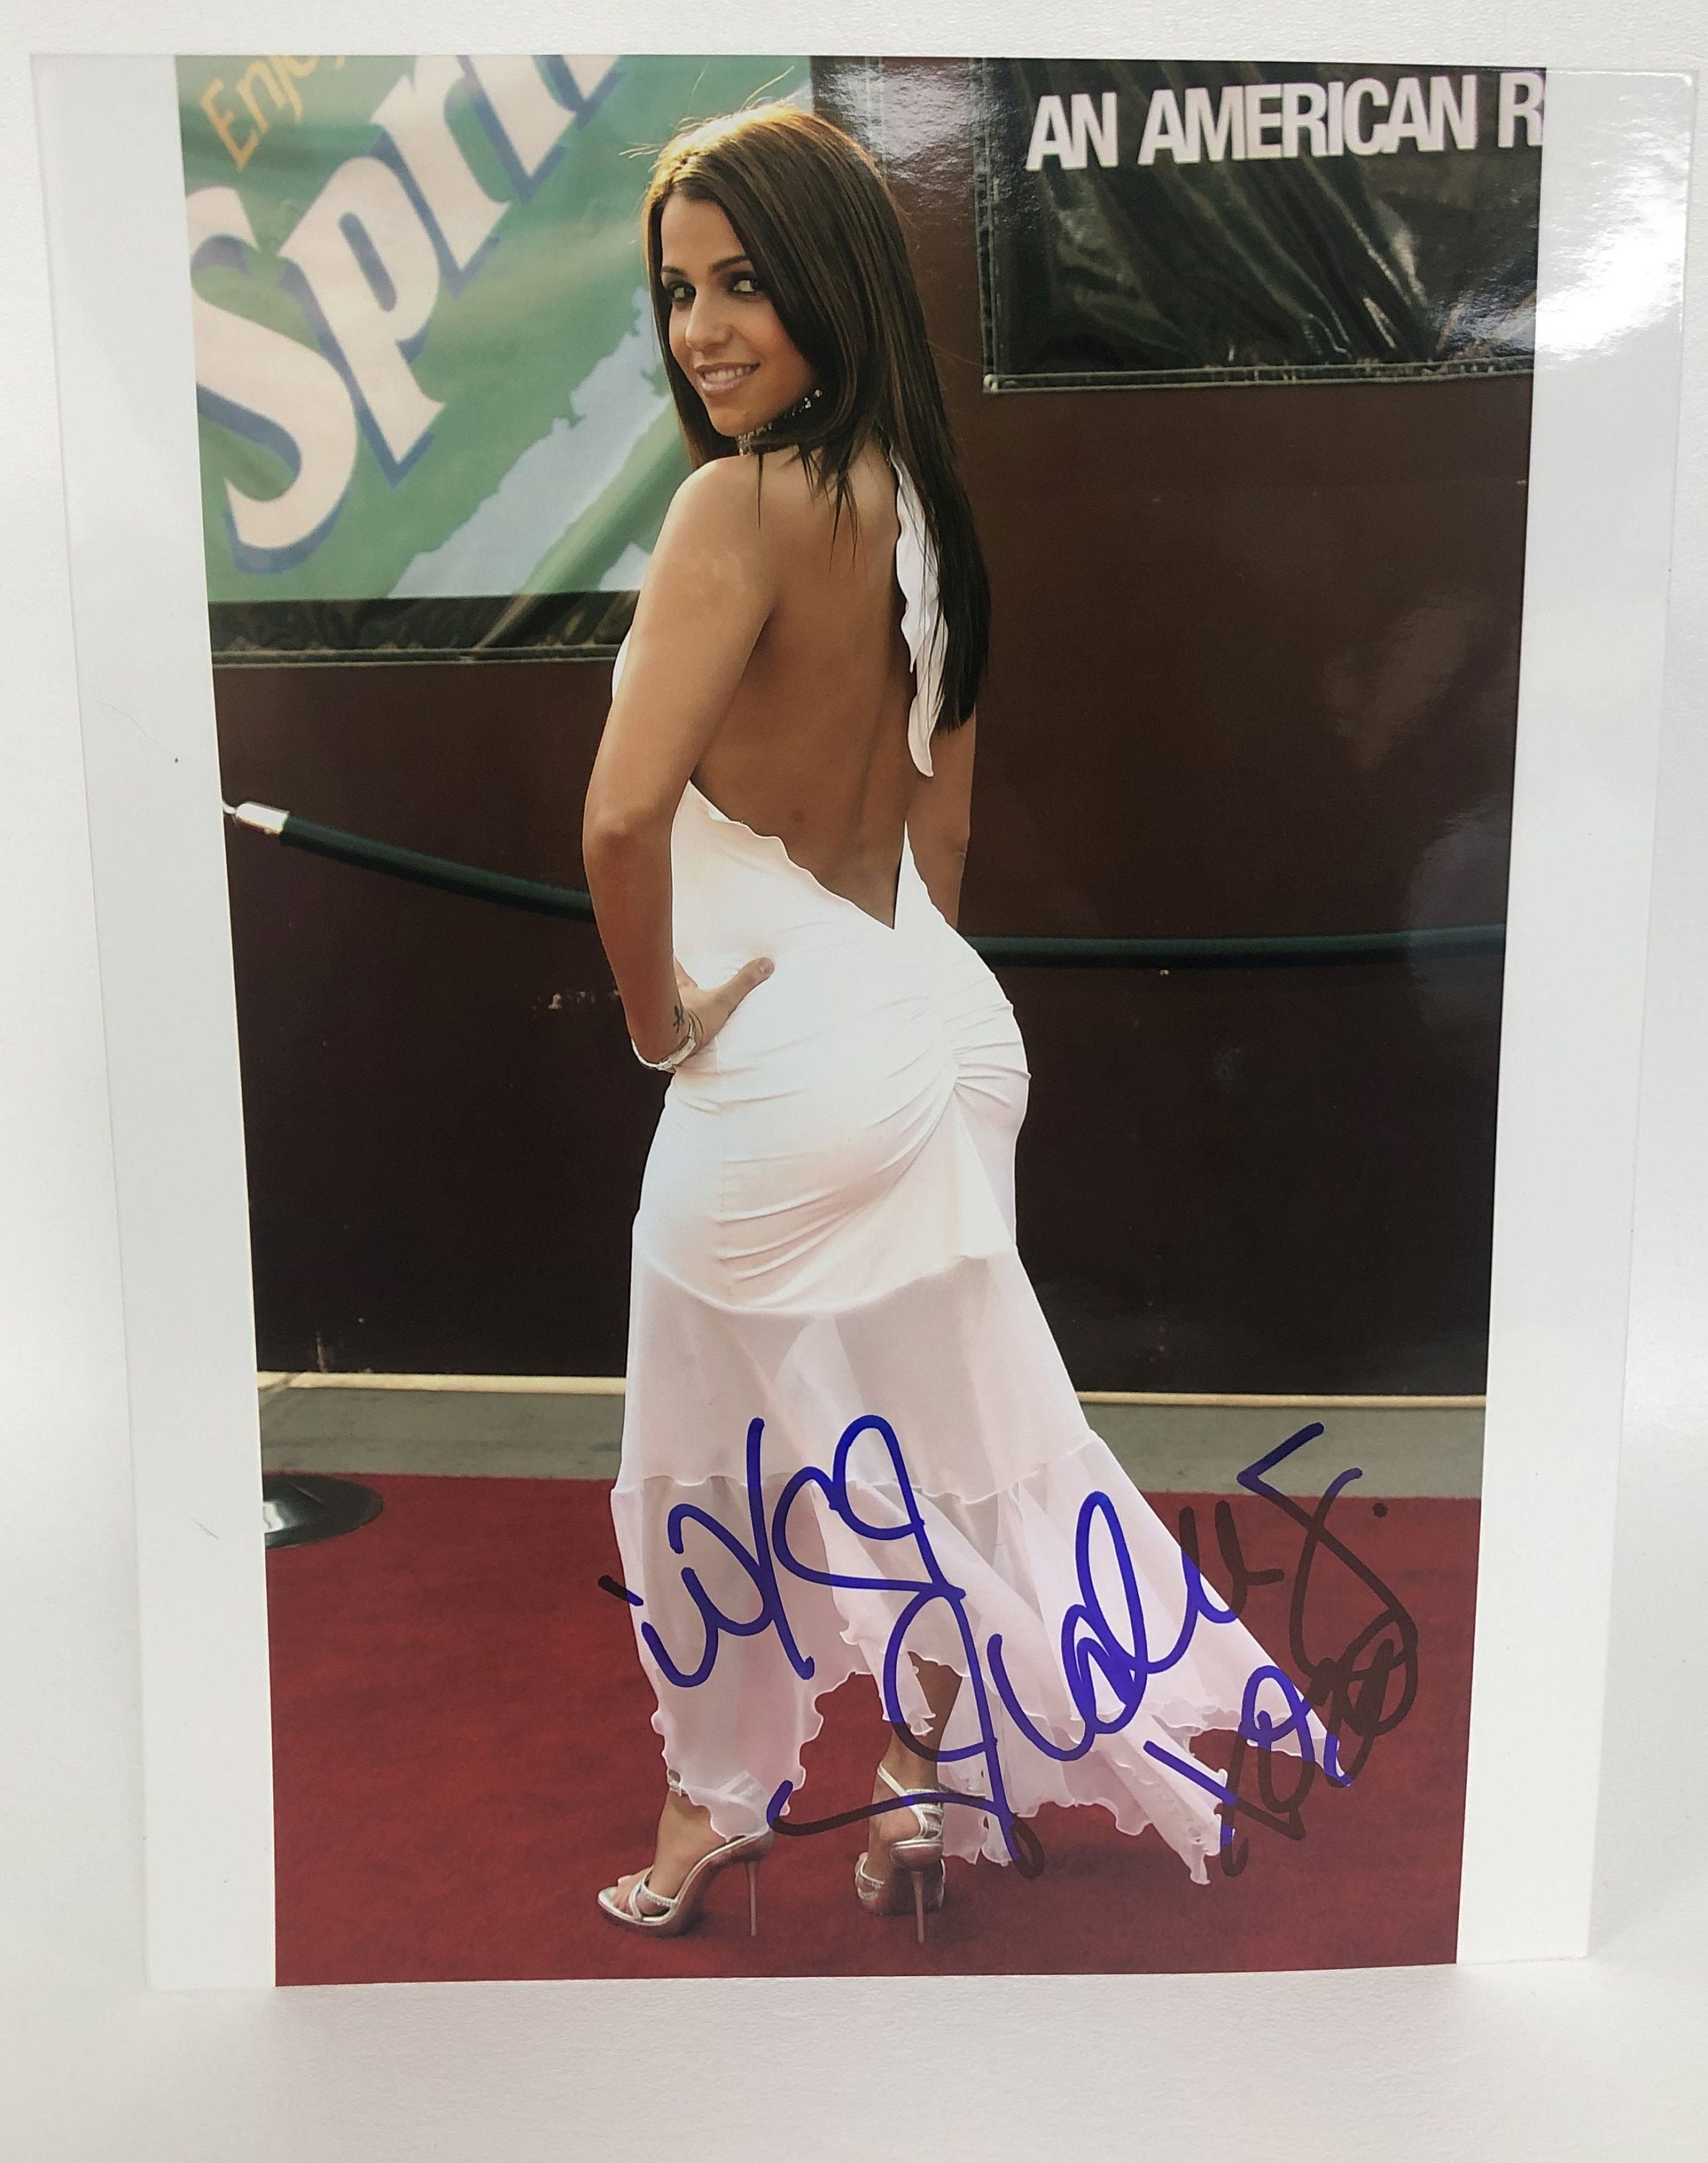 Vida Guerra Signed Autographed Glossy 8x10 Photo pic